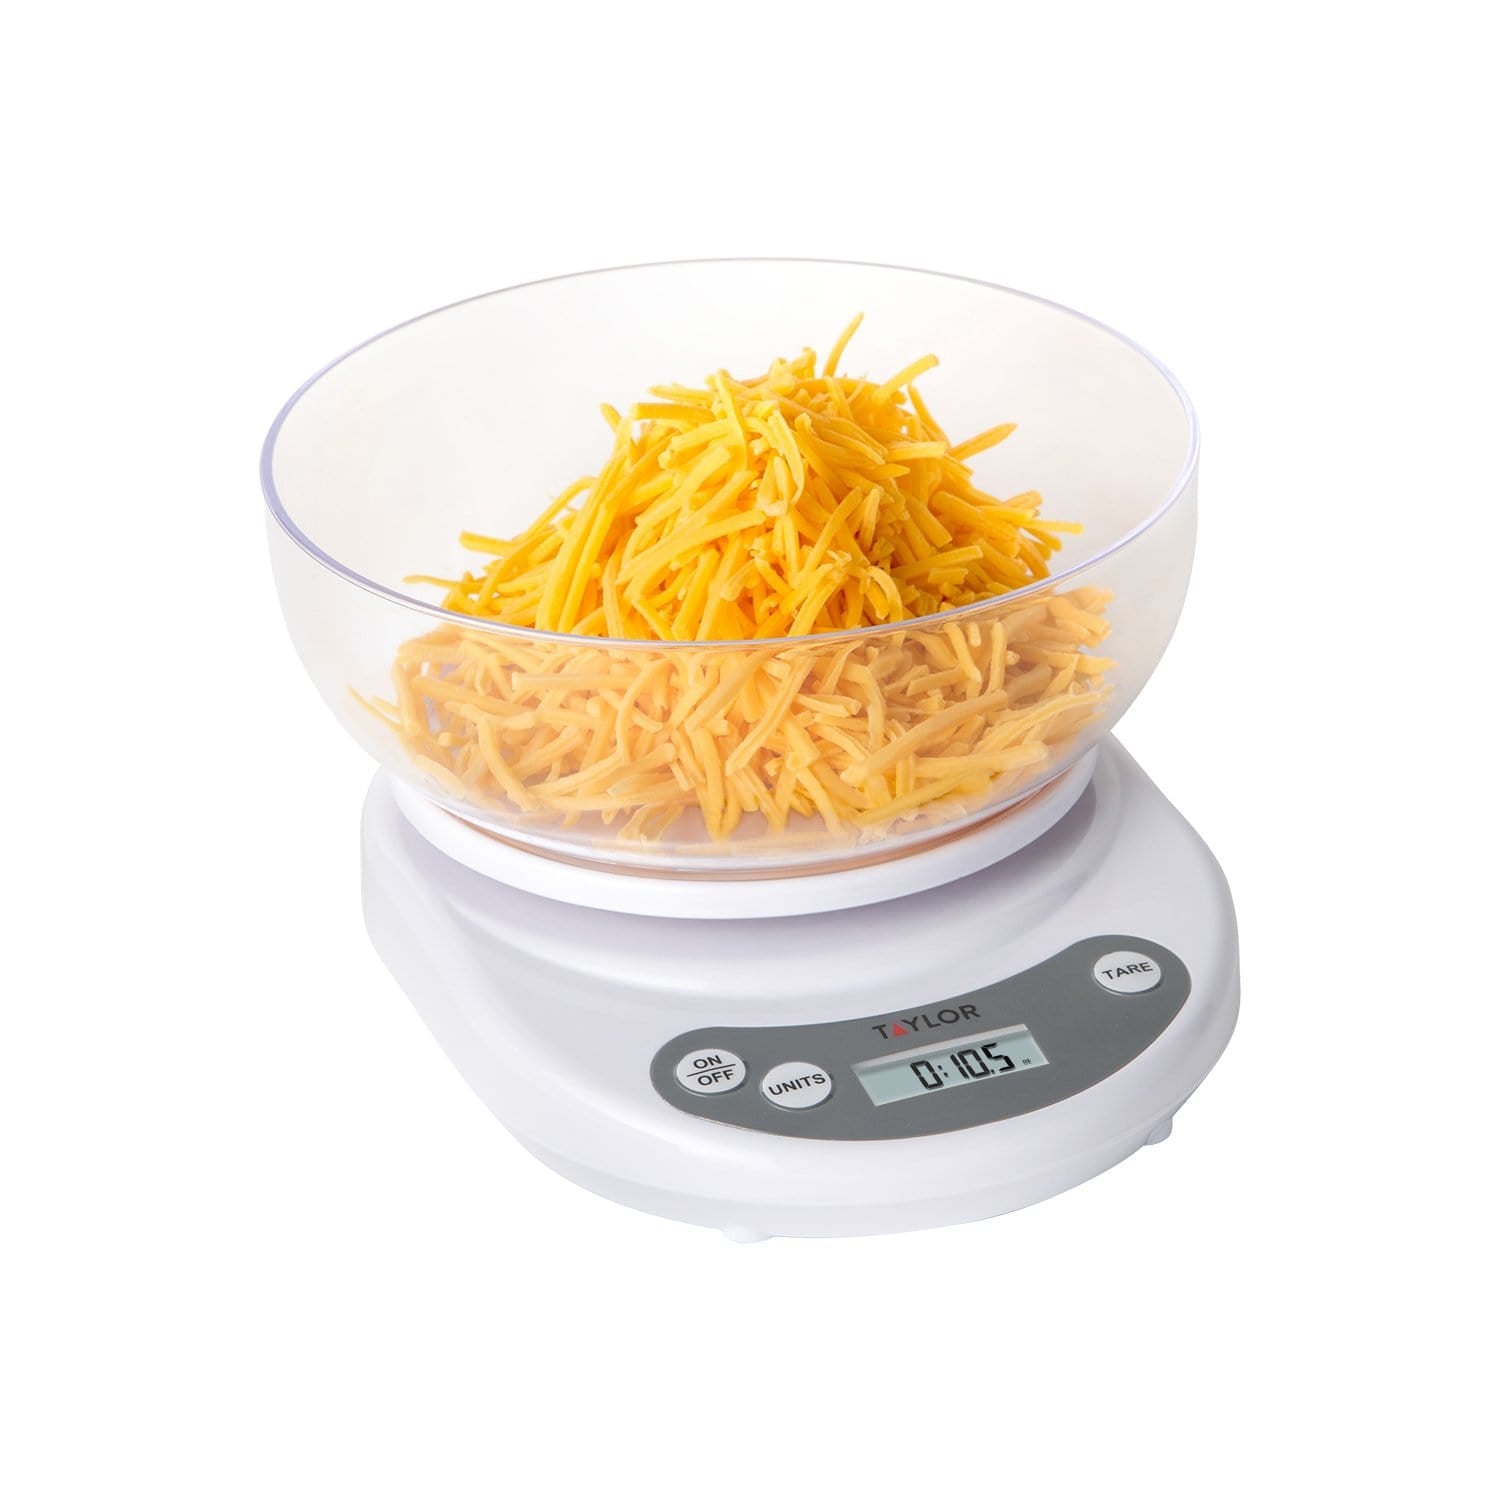 Kitchen Scales With Bowl : Target